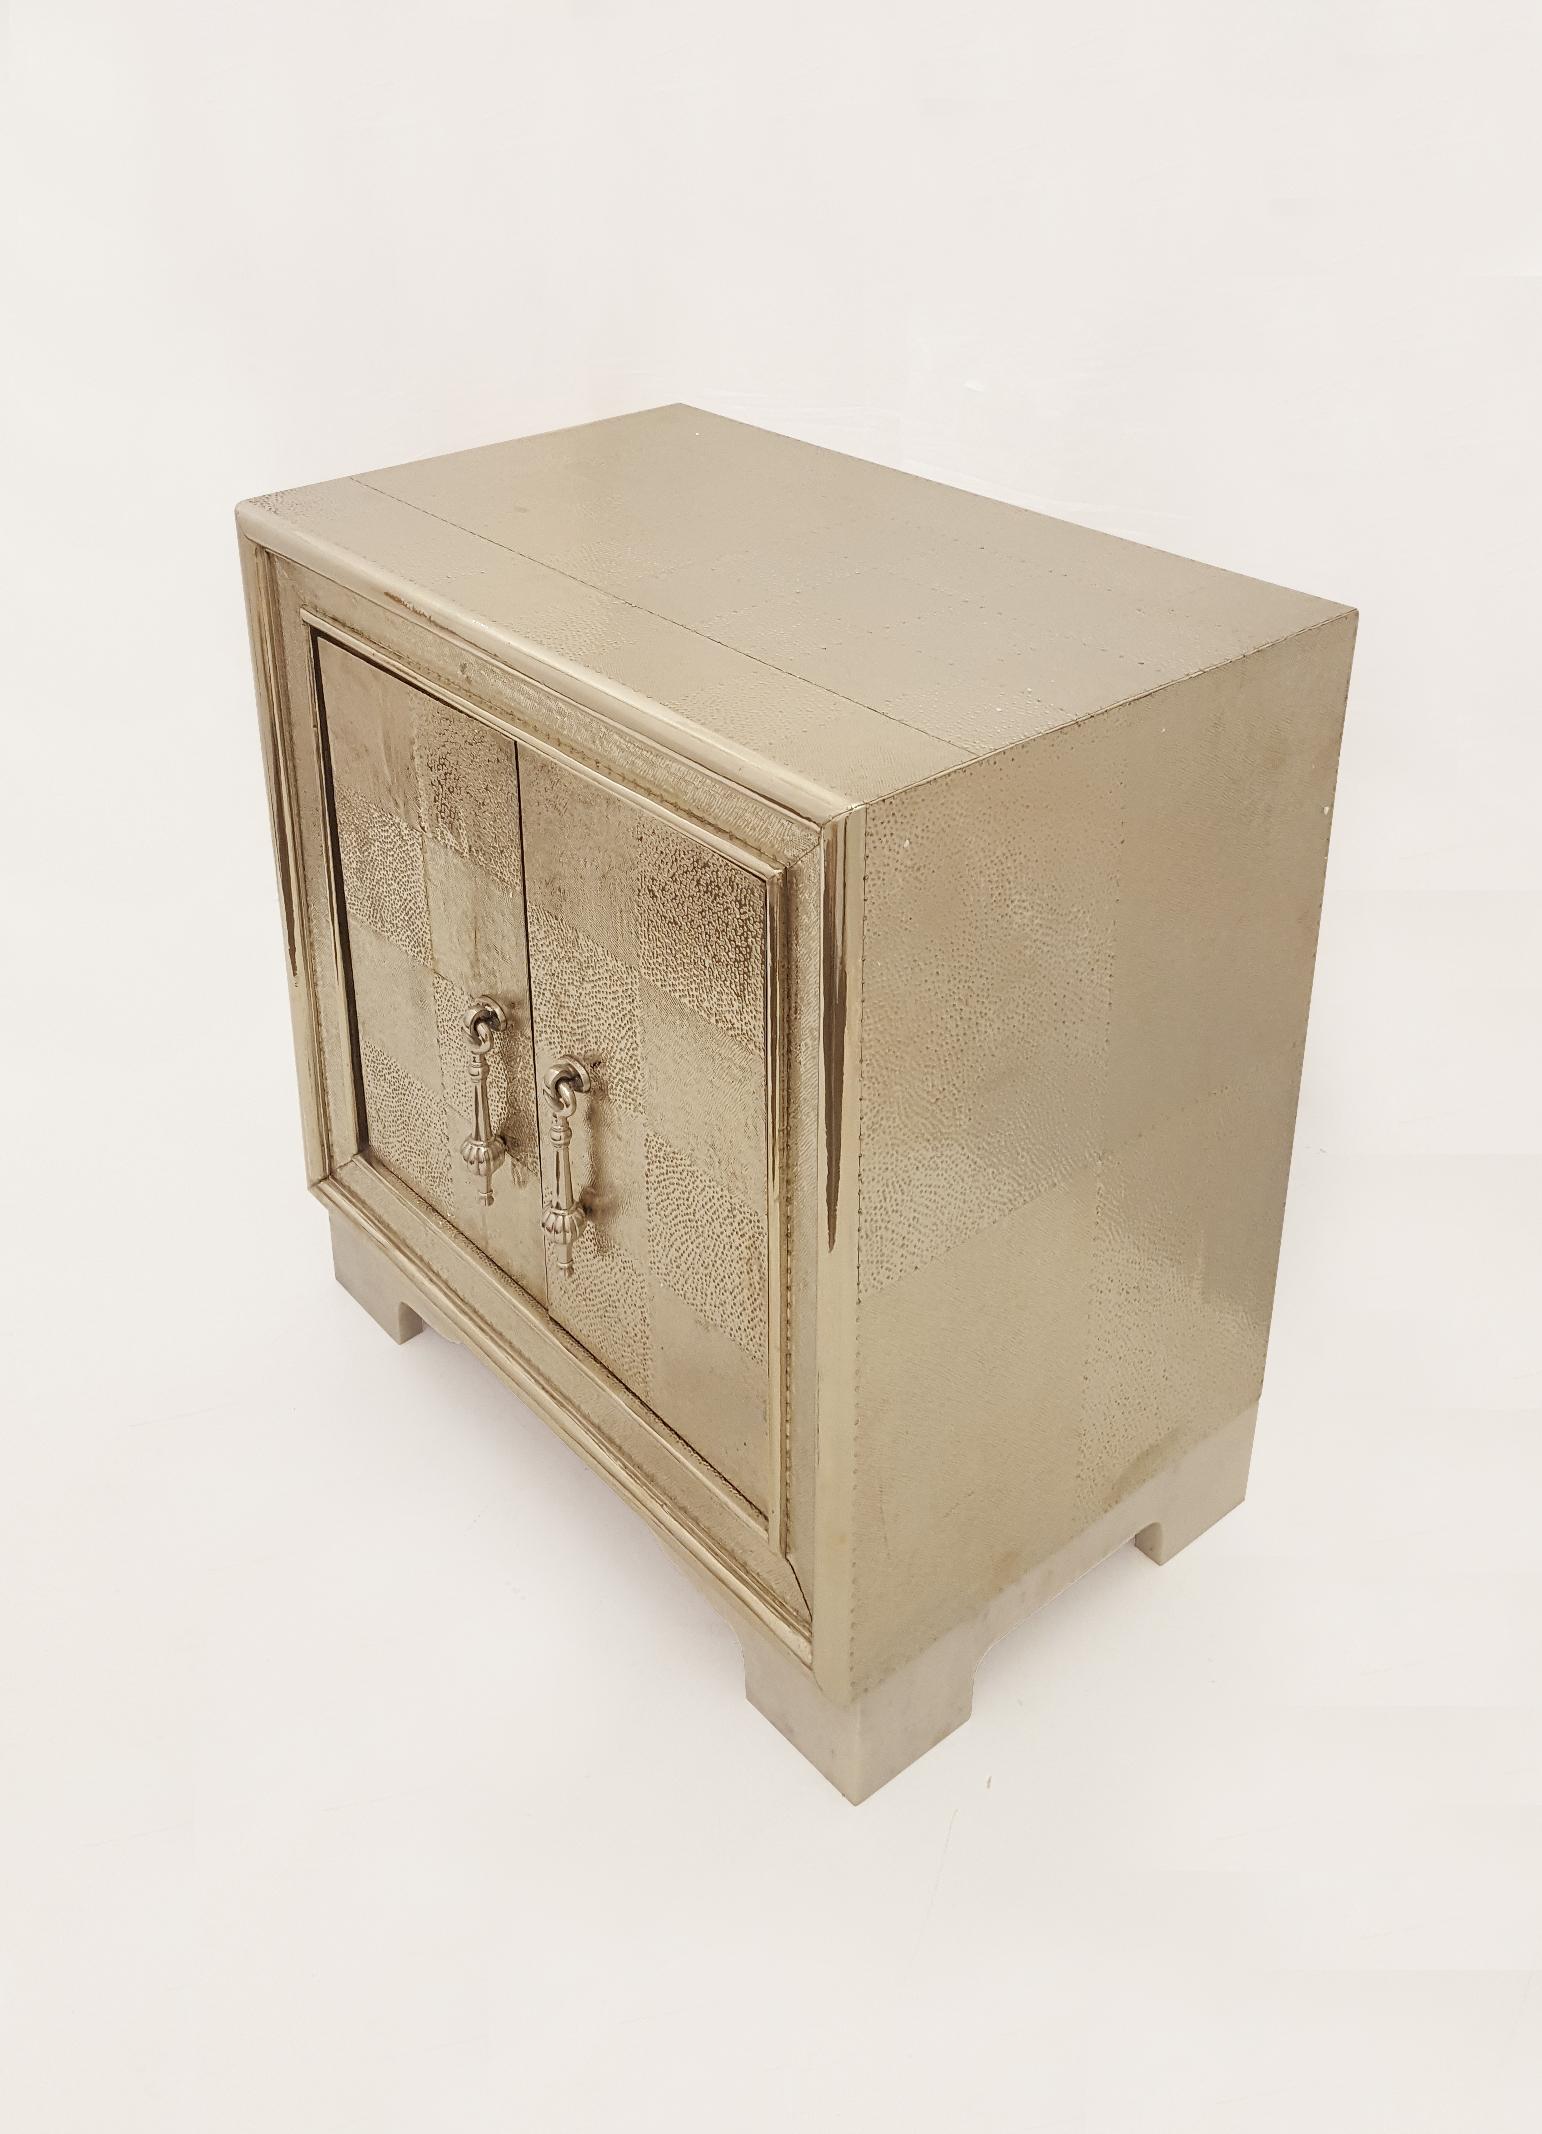 Hand-Crafted Carre Nightstand in White Bronze Clad Over Teakwood Handcrafted in India For Sale